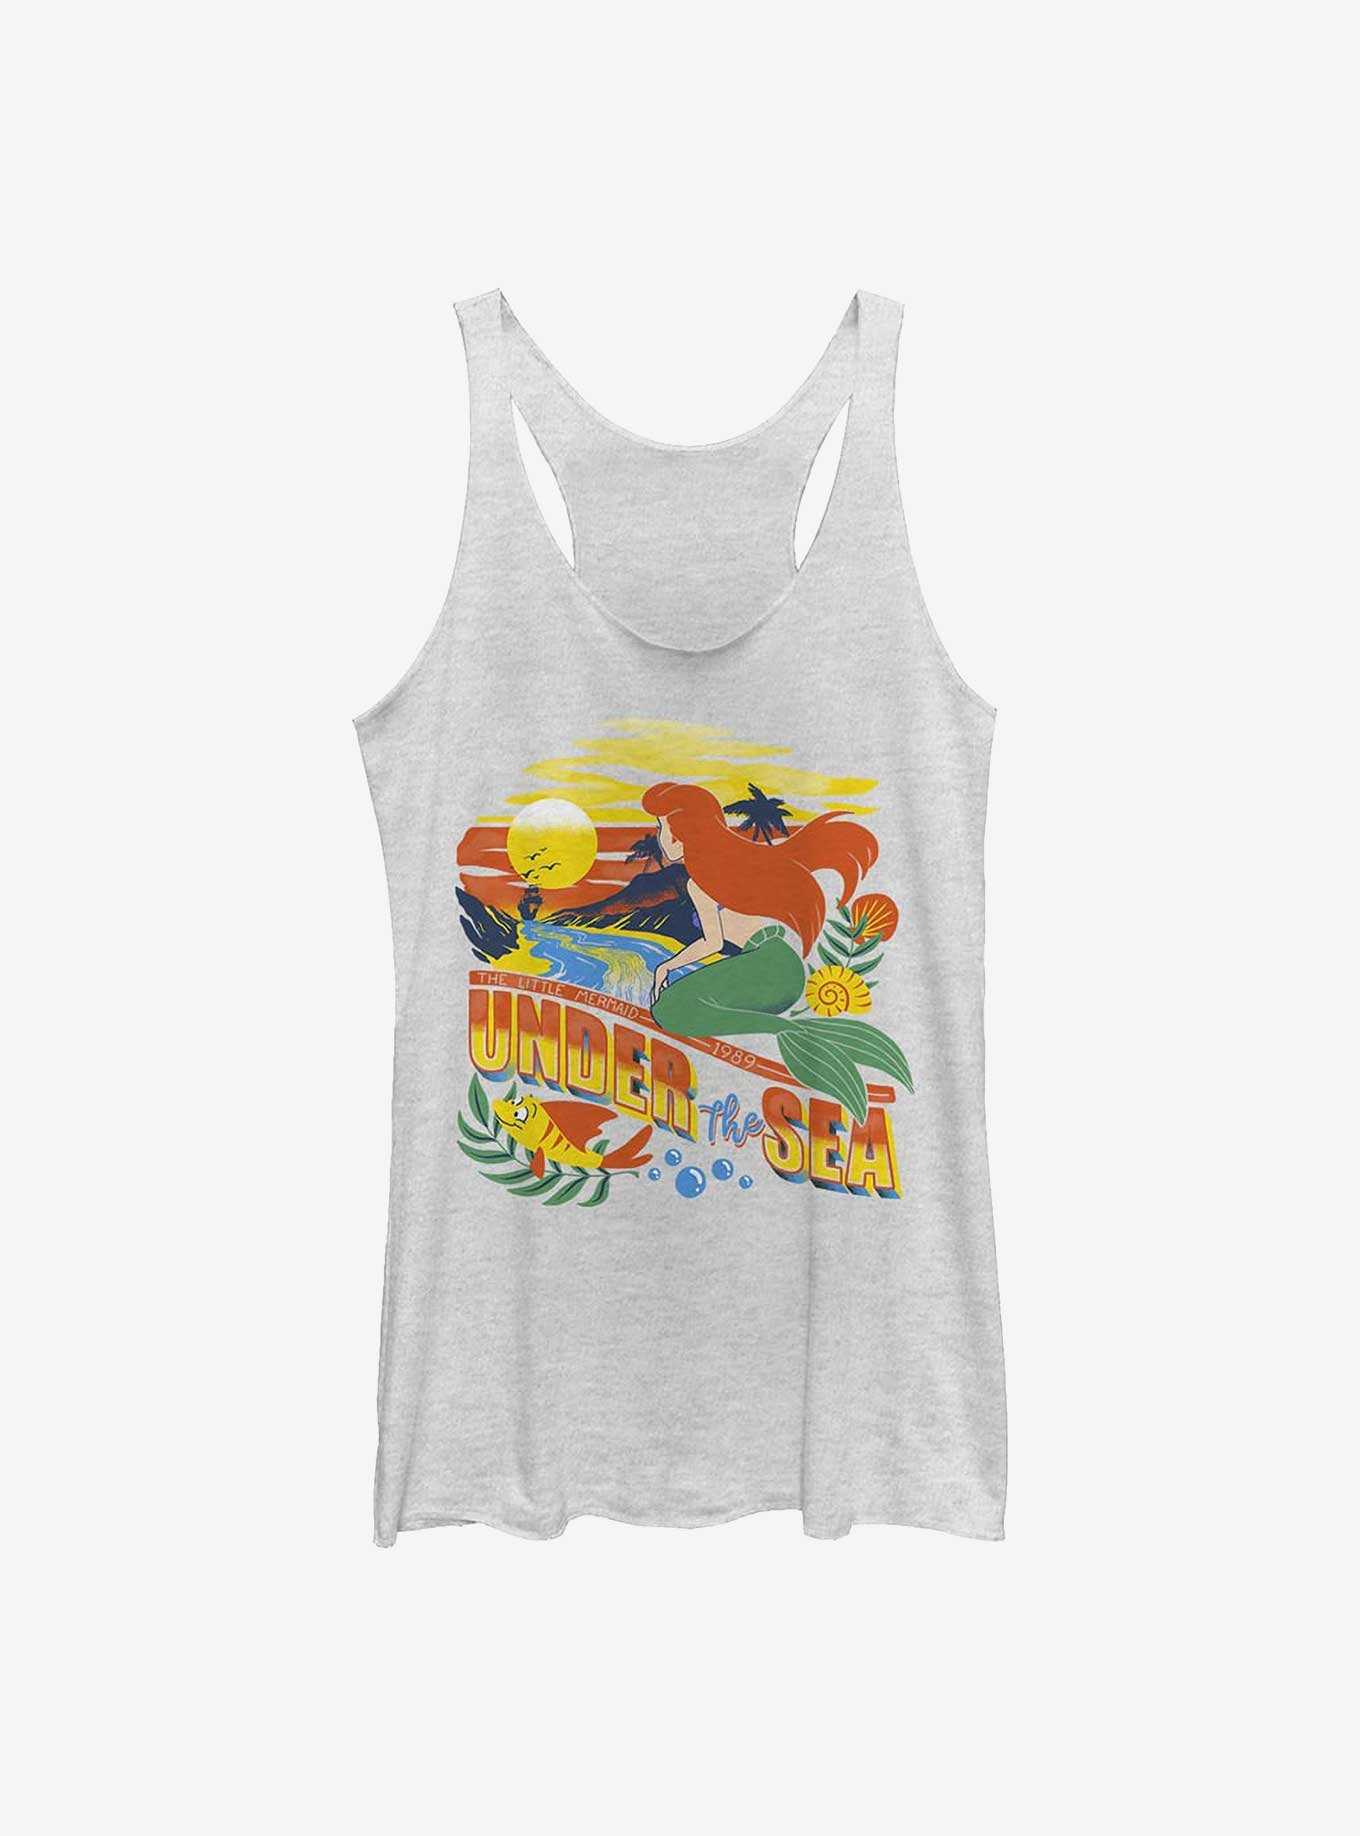 Disney The Little Mermaid Part Of Your World Over The Horizon Girls Tank, , hi-res